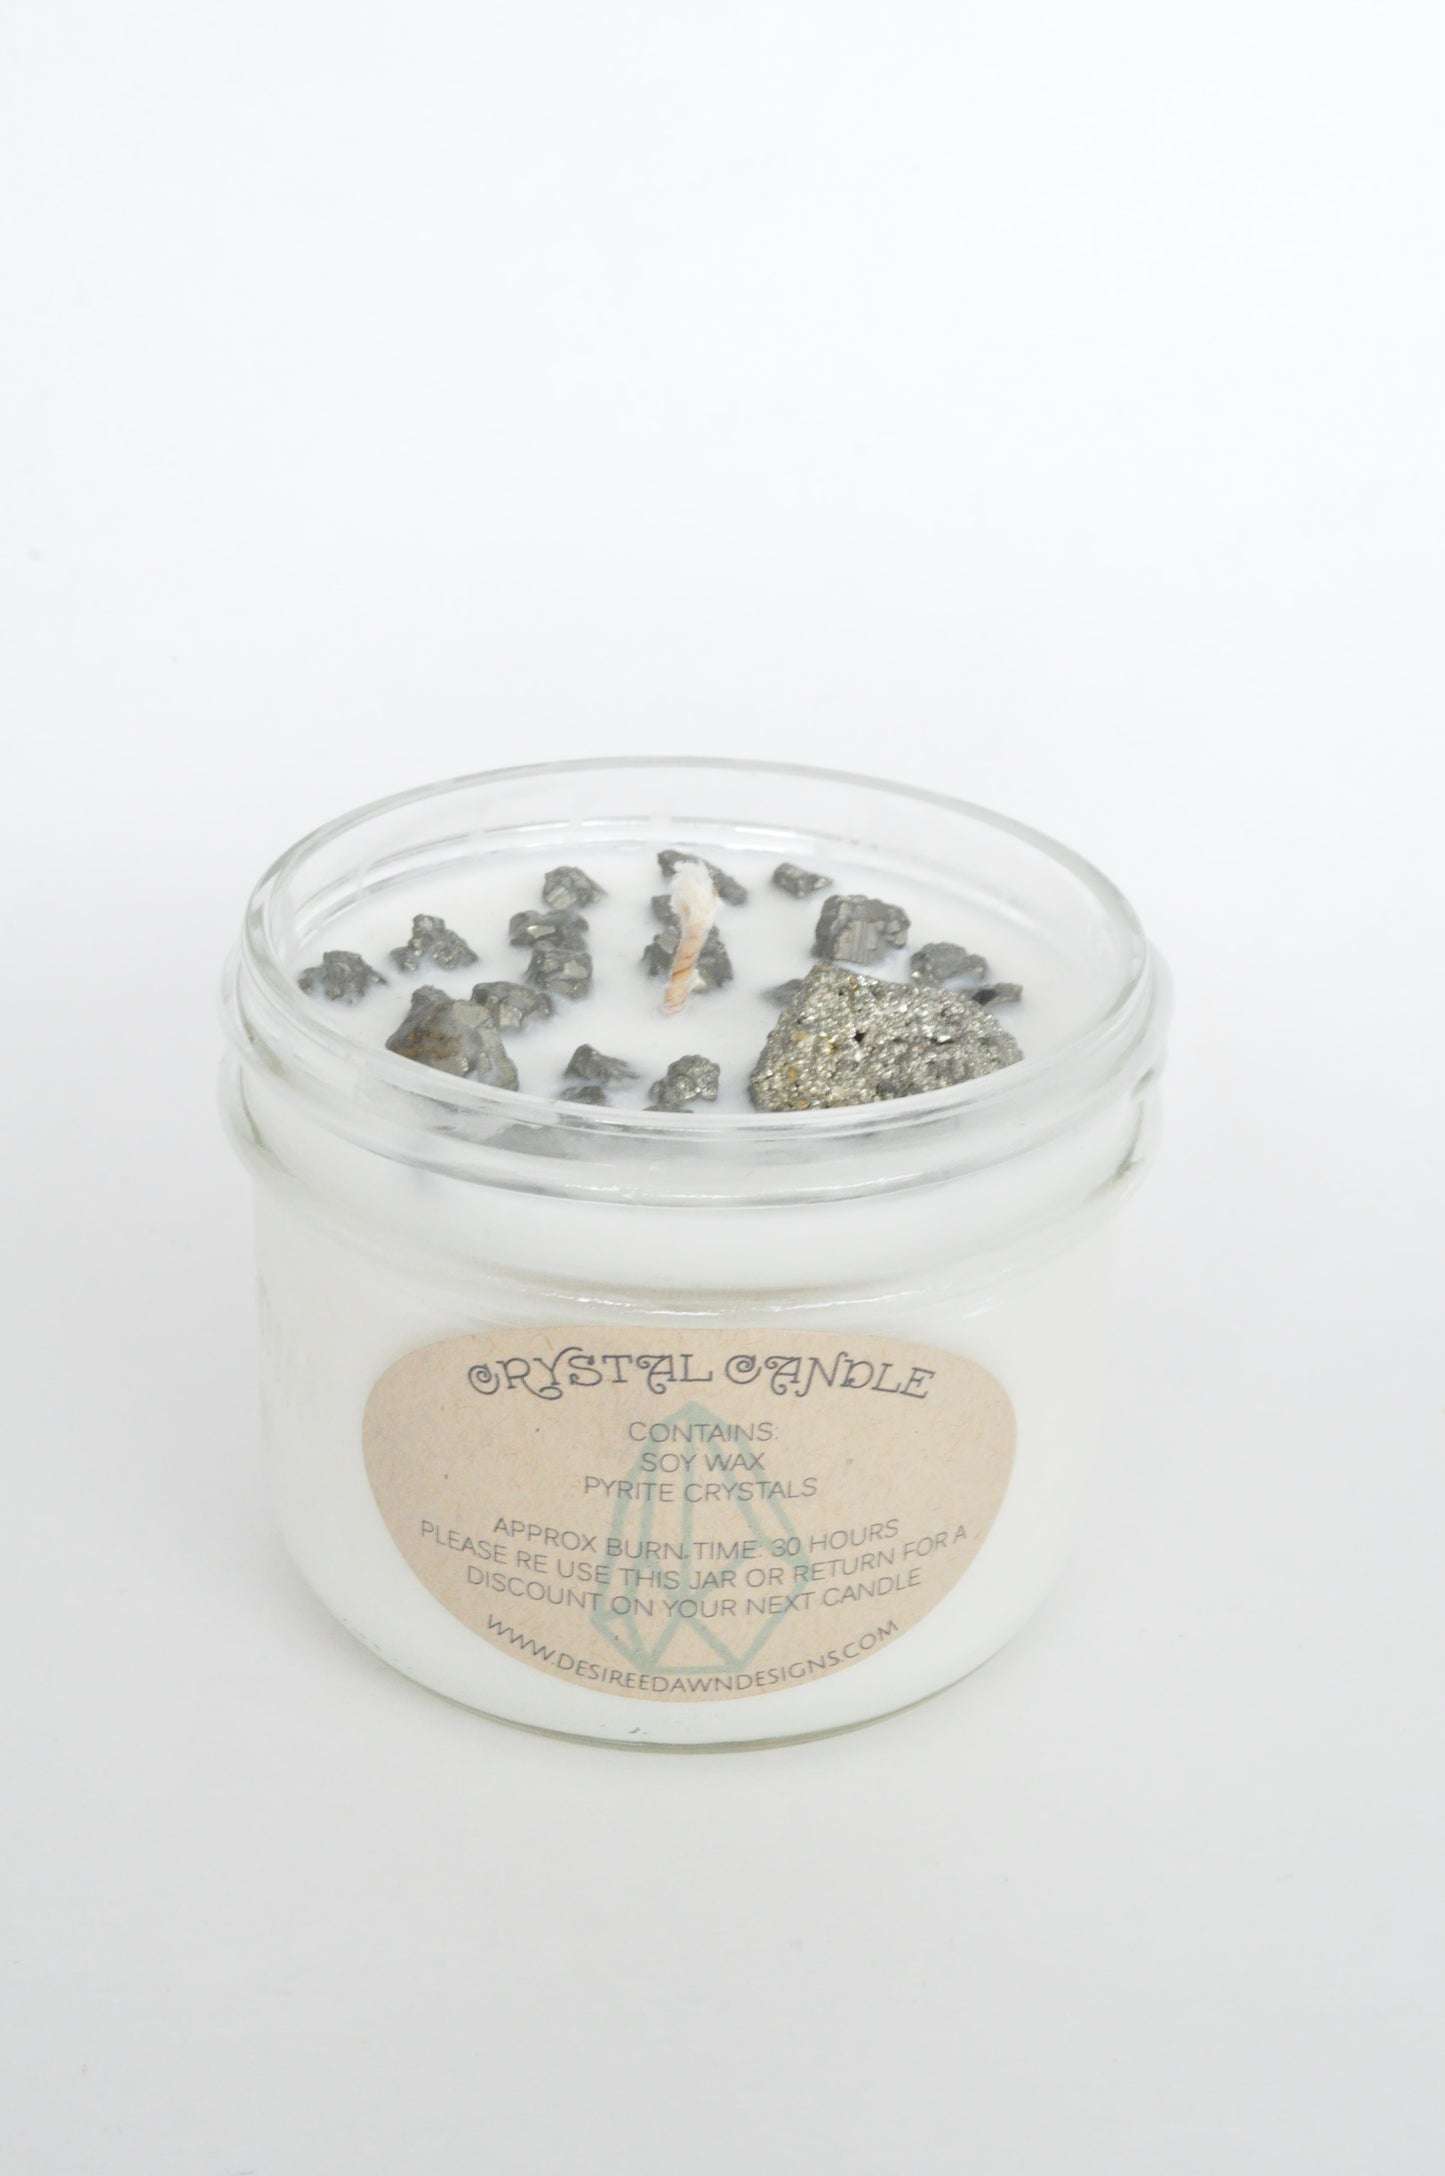 Gold Rush Crystal Candle